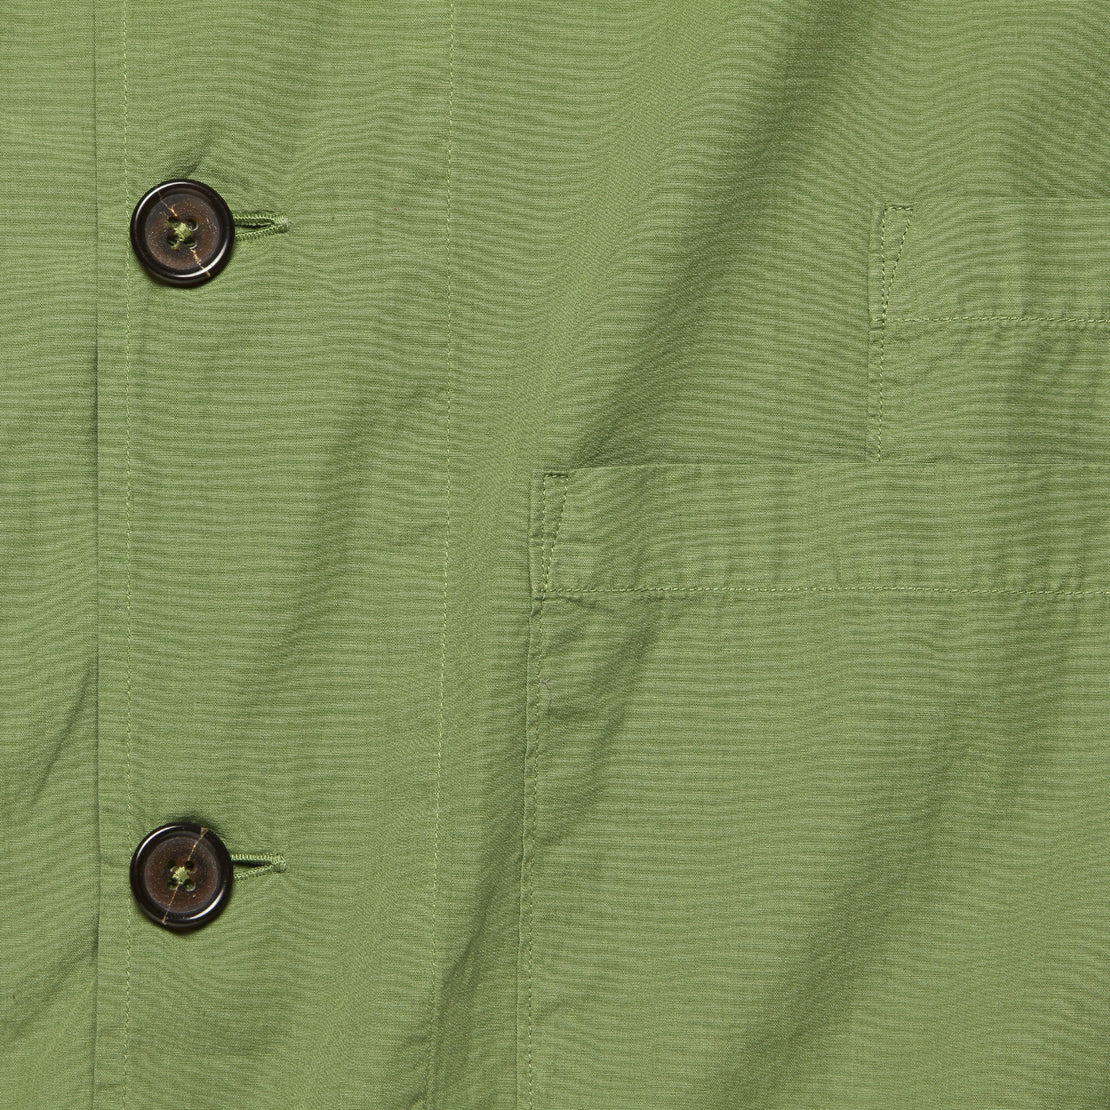 Bakers Poplin Overshirt - Olive - Universal Works - STAG Provisions - Outerwear - Shirt Jacket